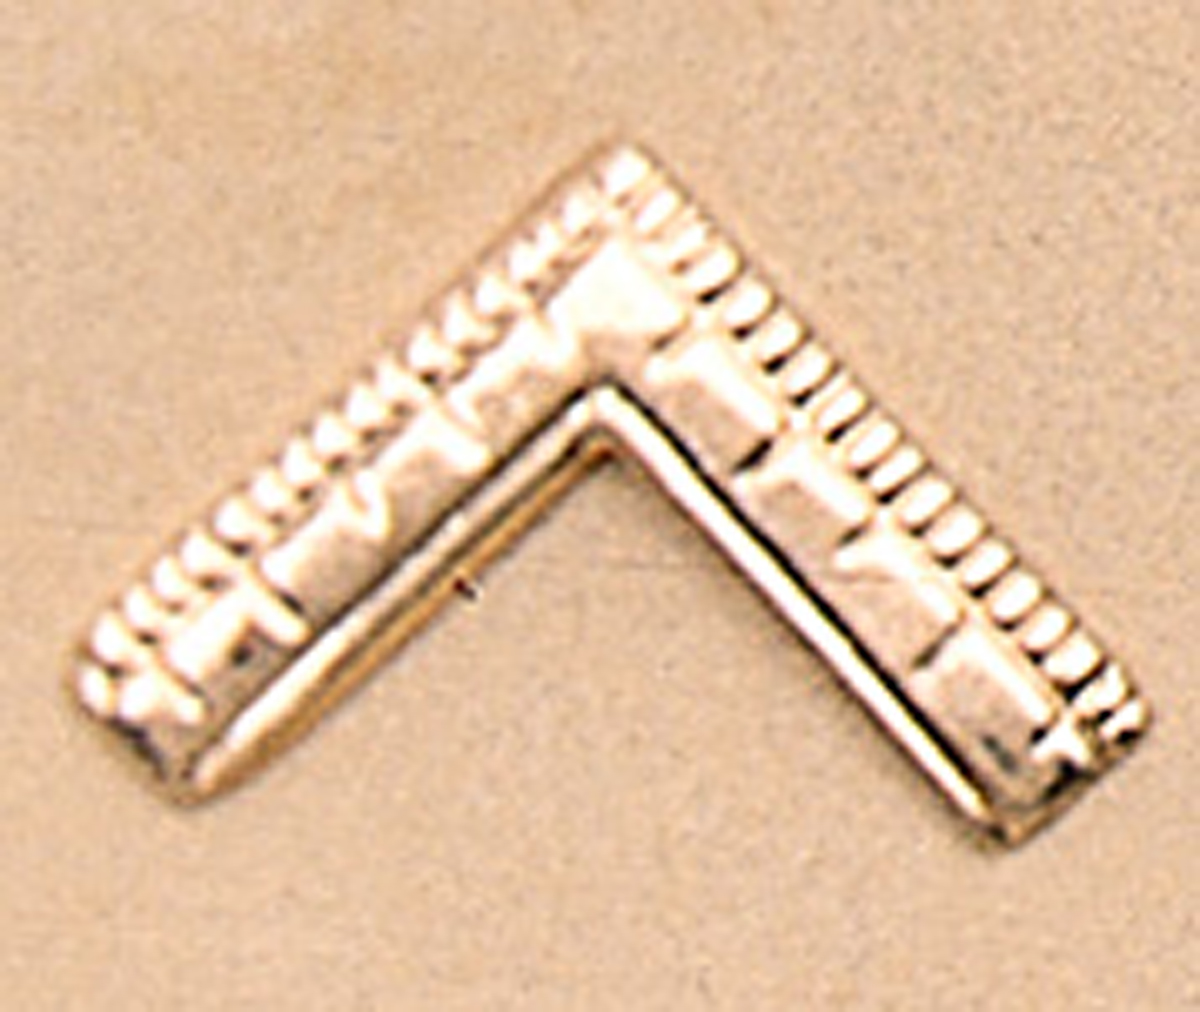 Master's Square Lapel button in 14K YG